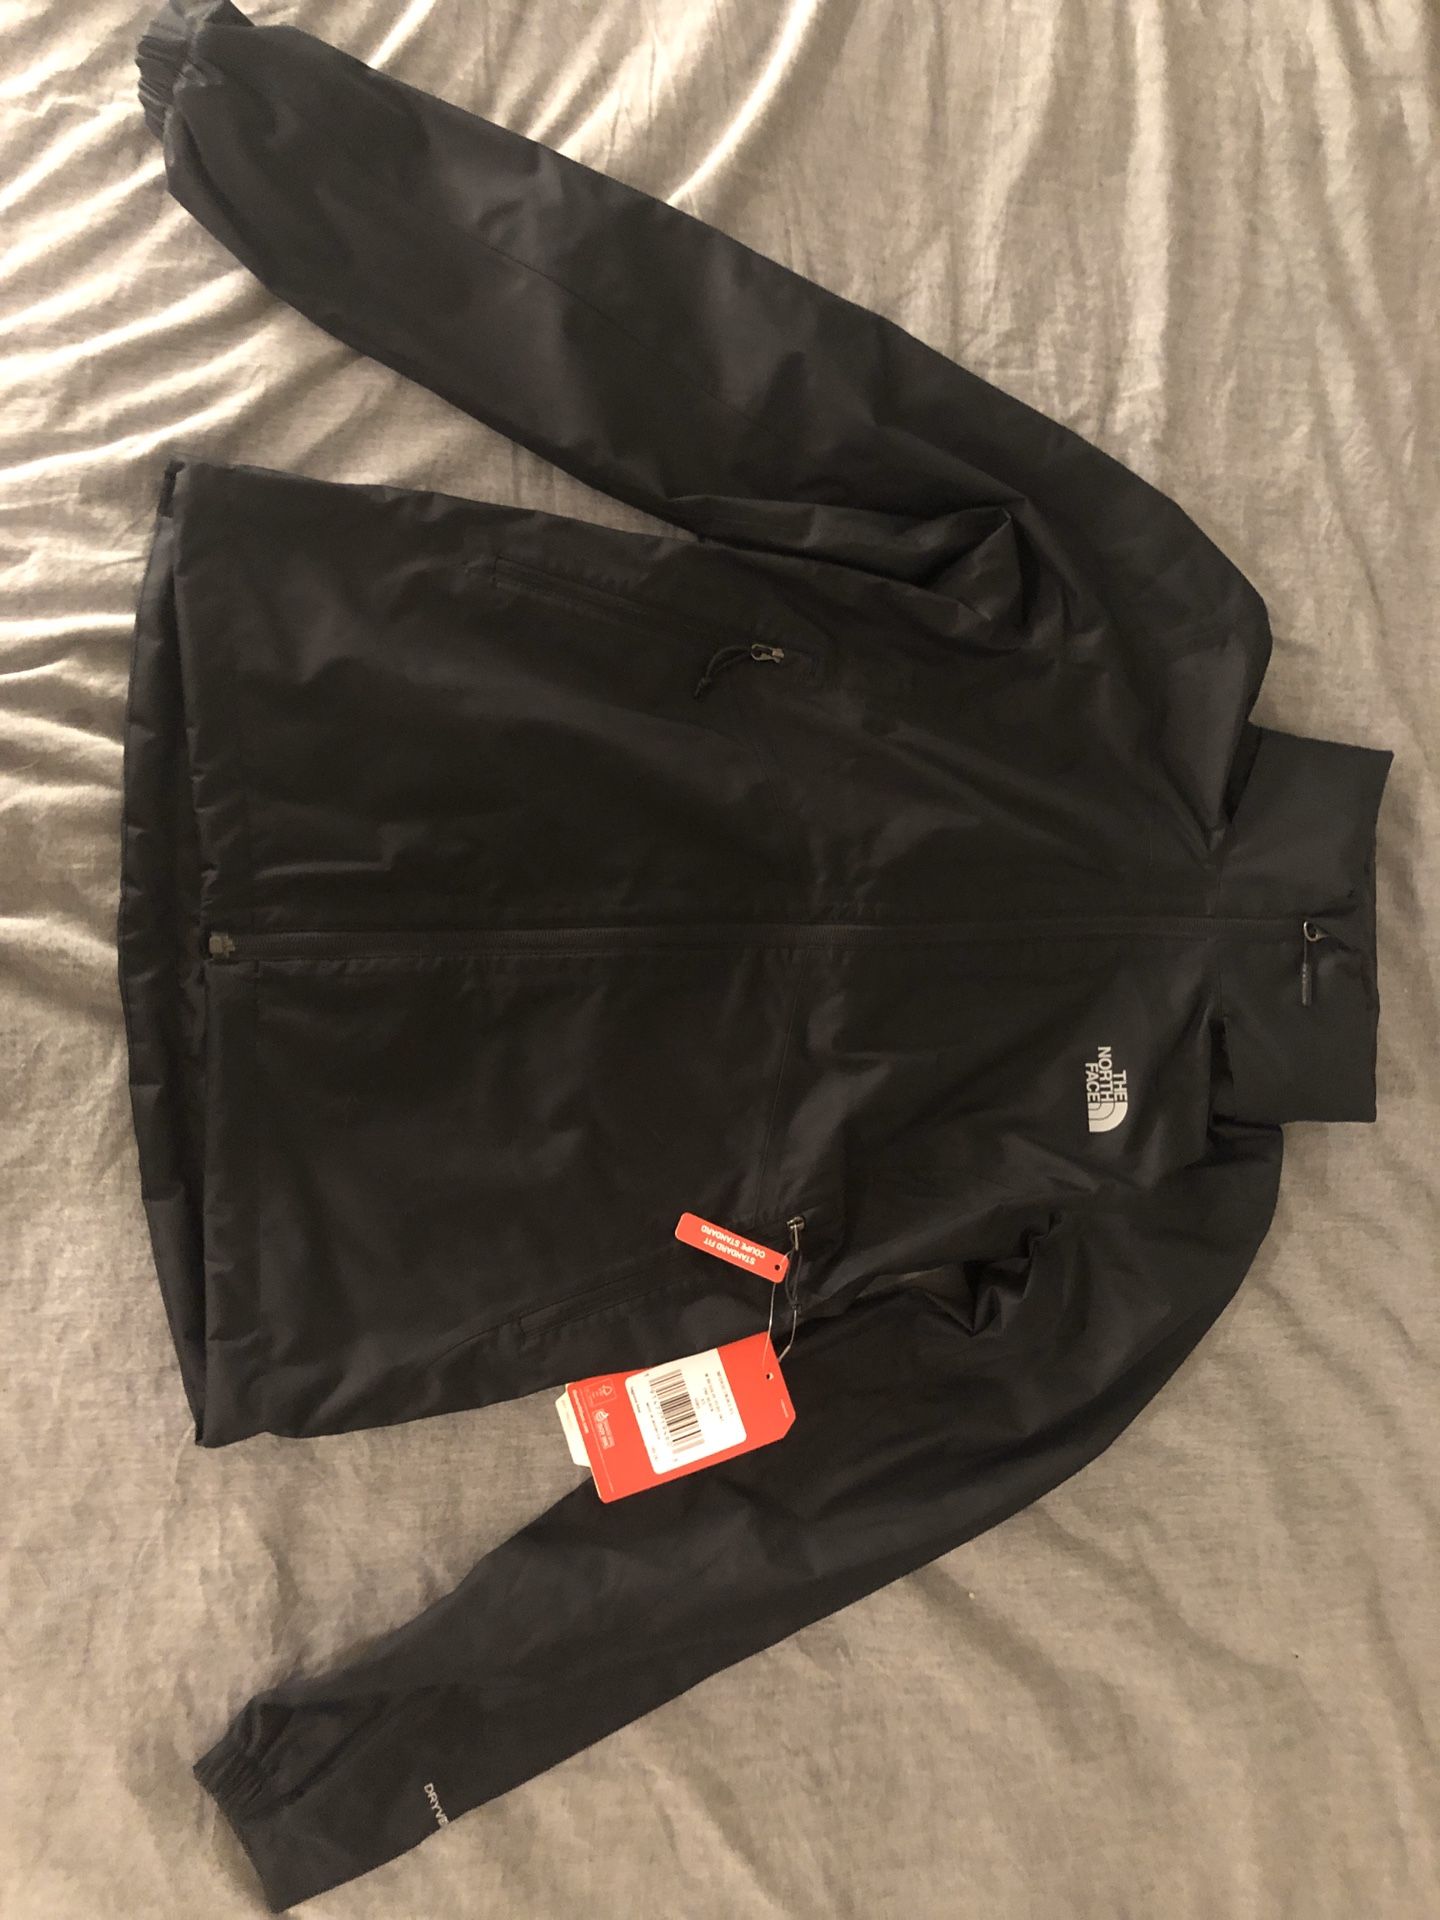 THE NORTH FACE W HIKE JACKET BLACK SIZE XS